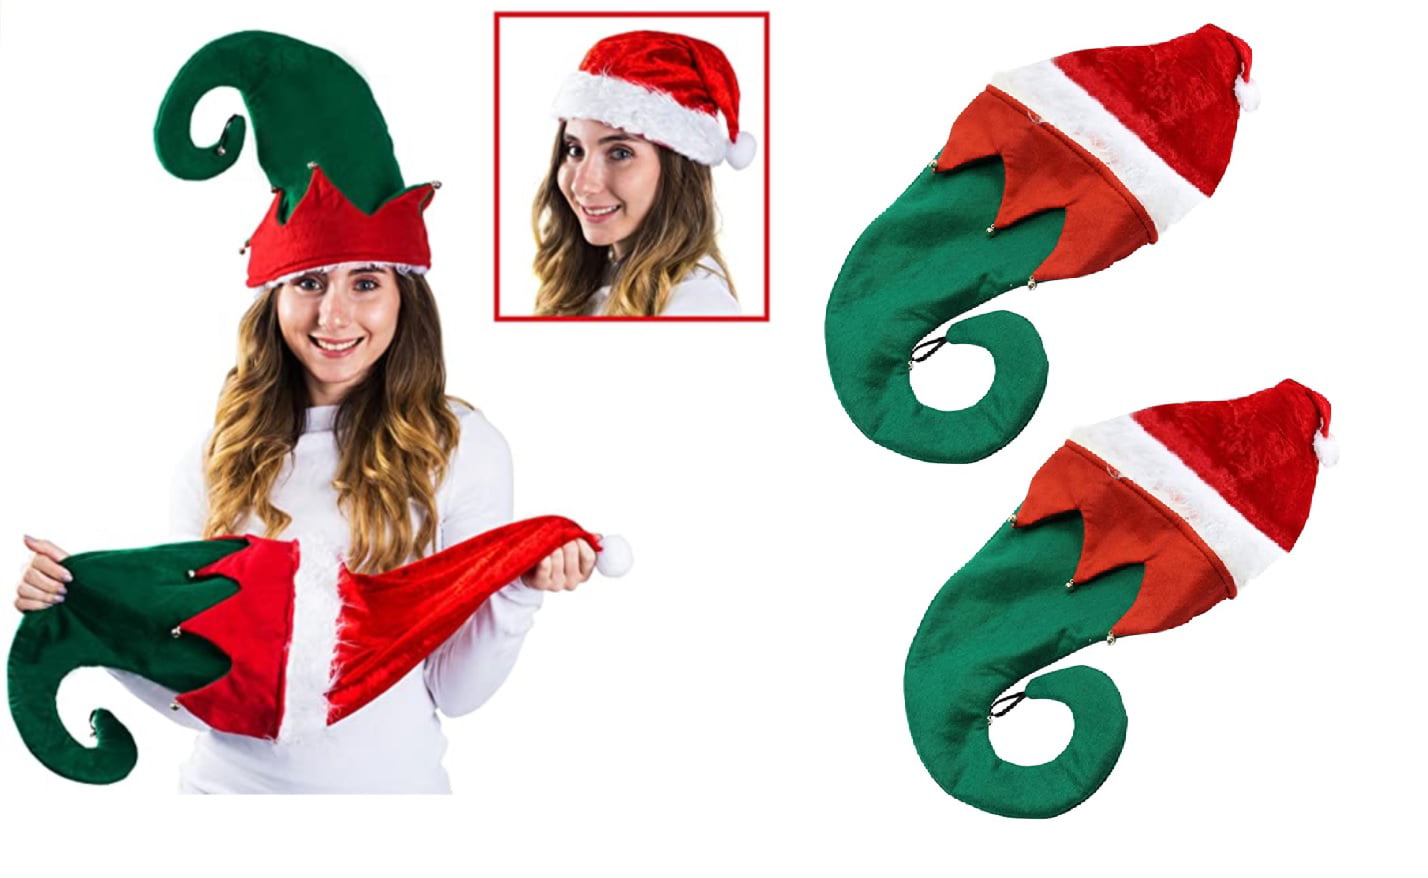 NOVELTY CHRISTMAS ELF HATS 4 PACK XMAS FANCY DRESS PARTY OFFICE WORK NOVELTY HAT 